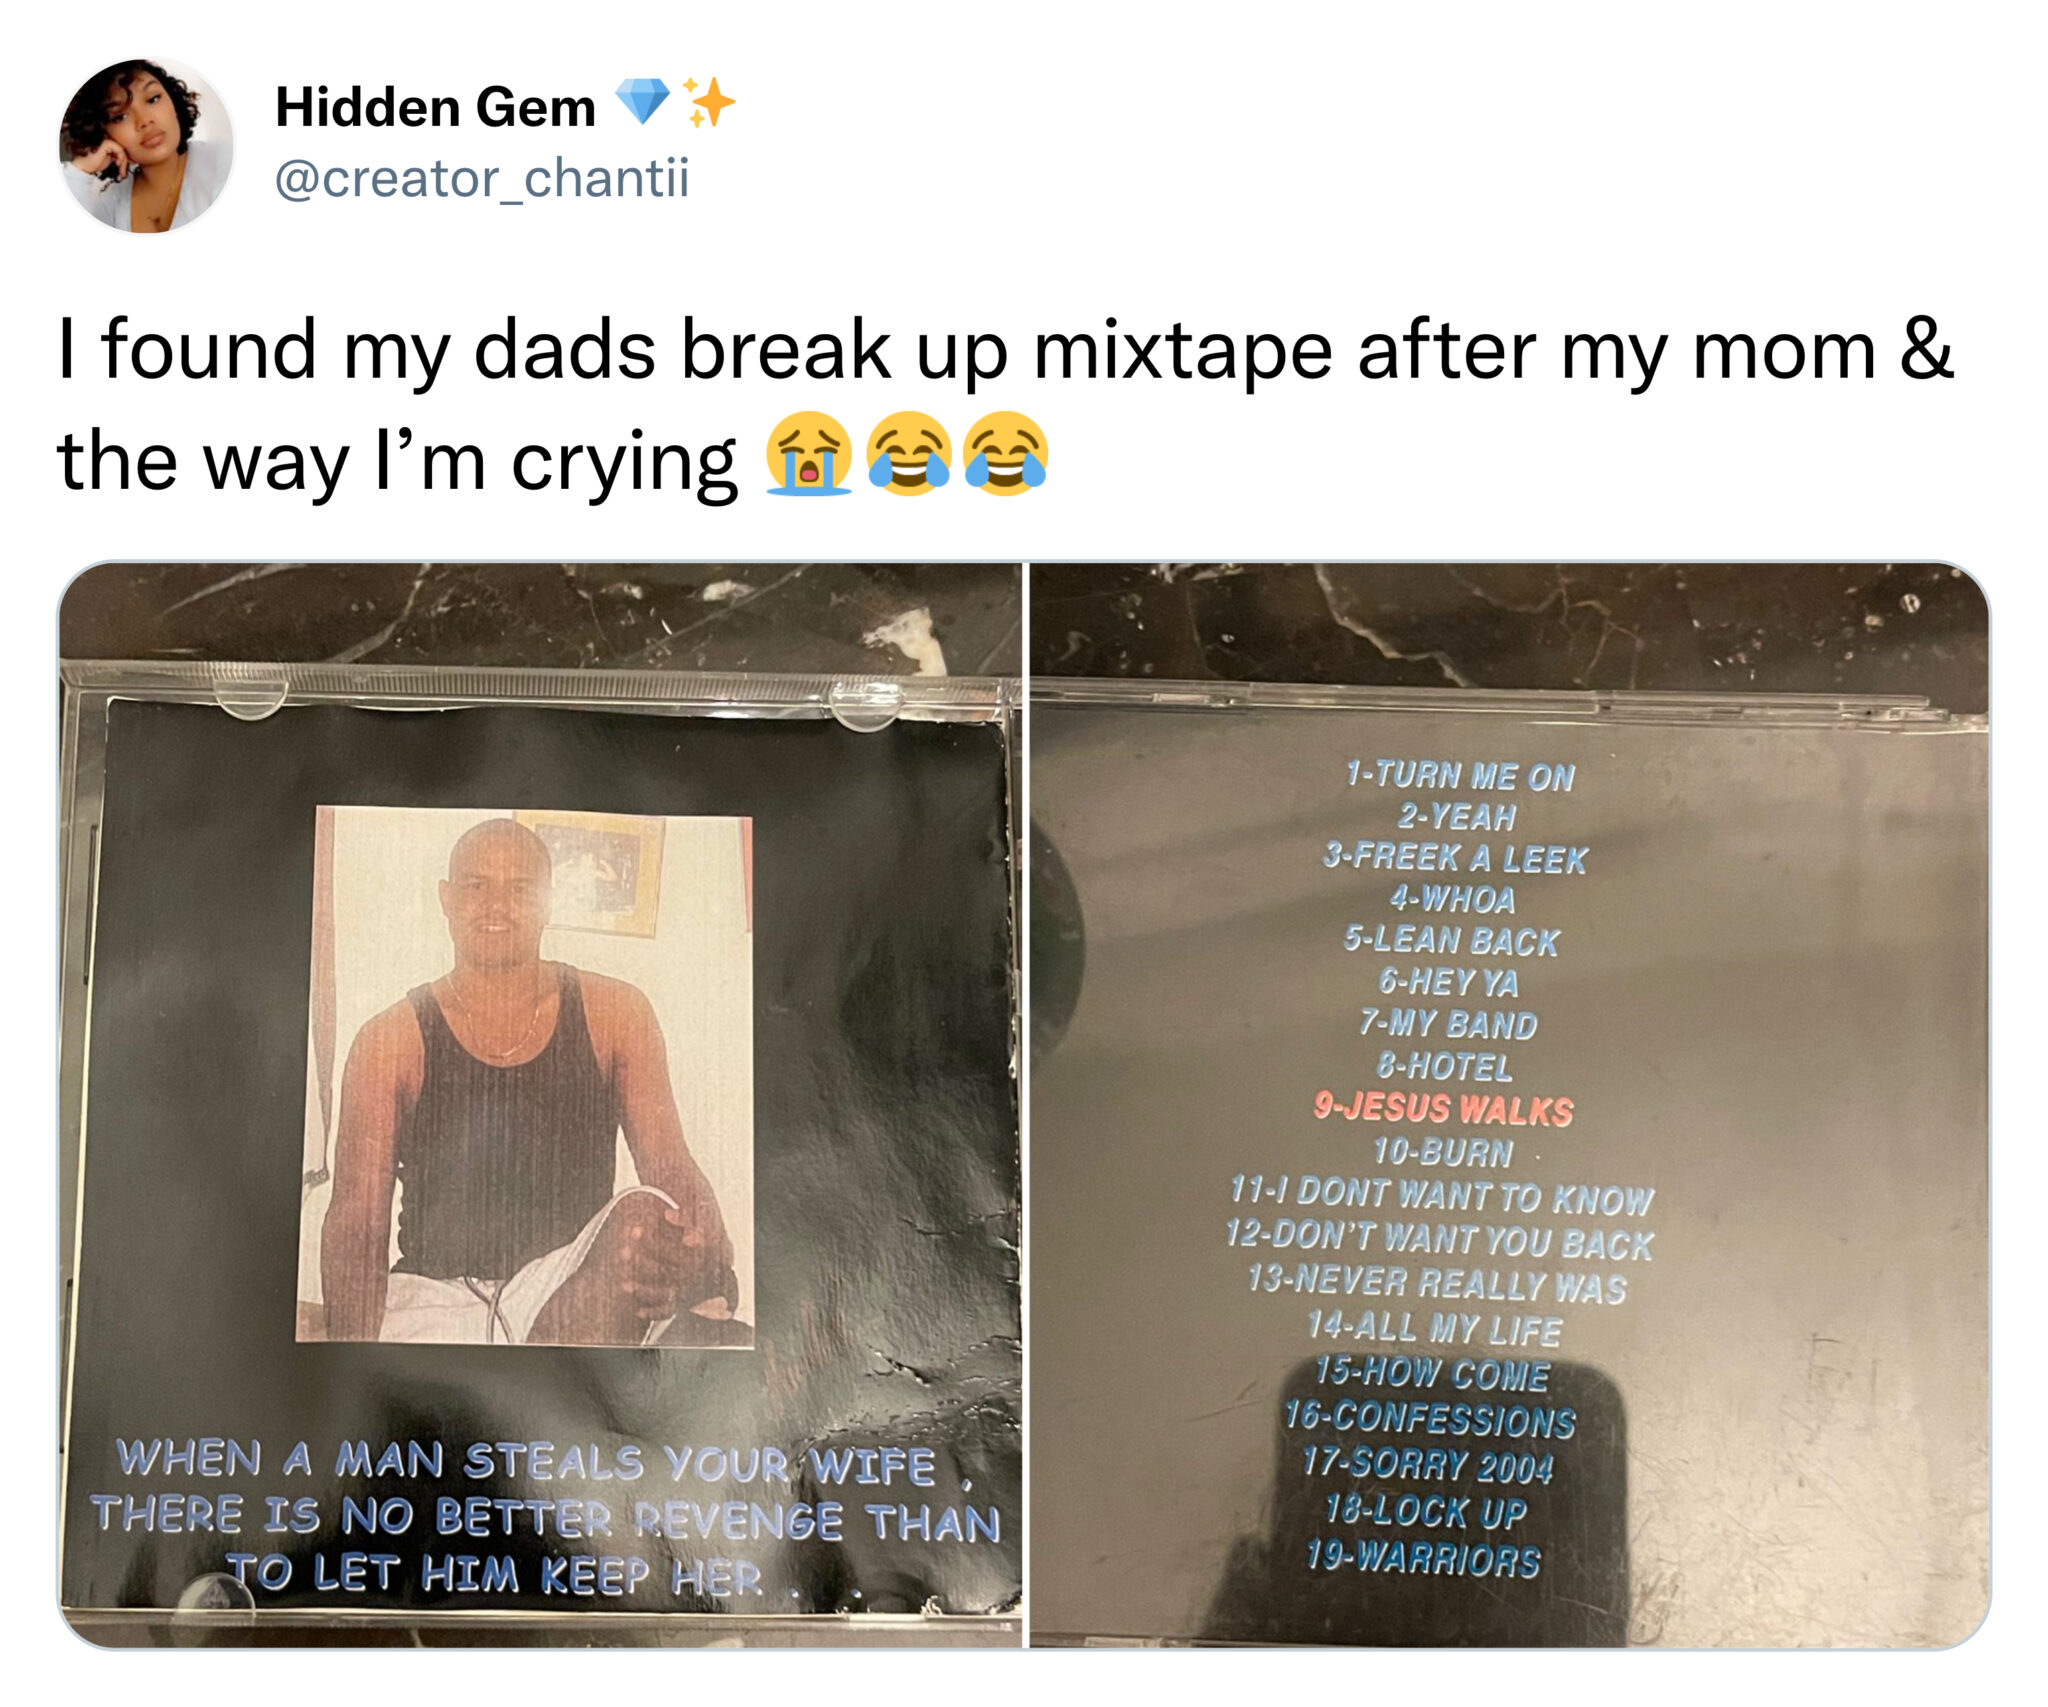 Funny Tweets - I found my dads break up mixtape after my mom & the way I'm crying